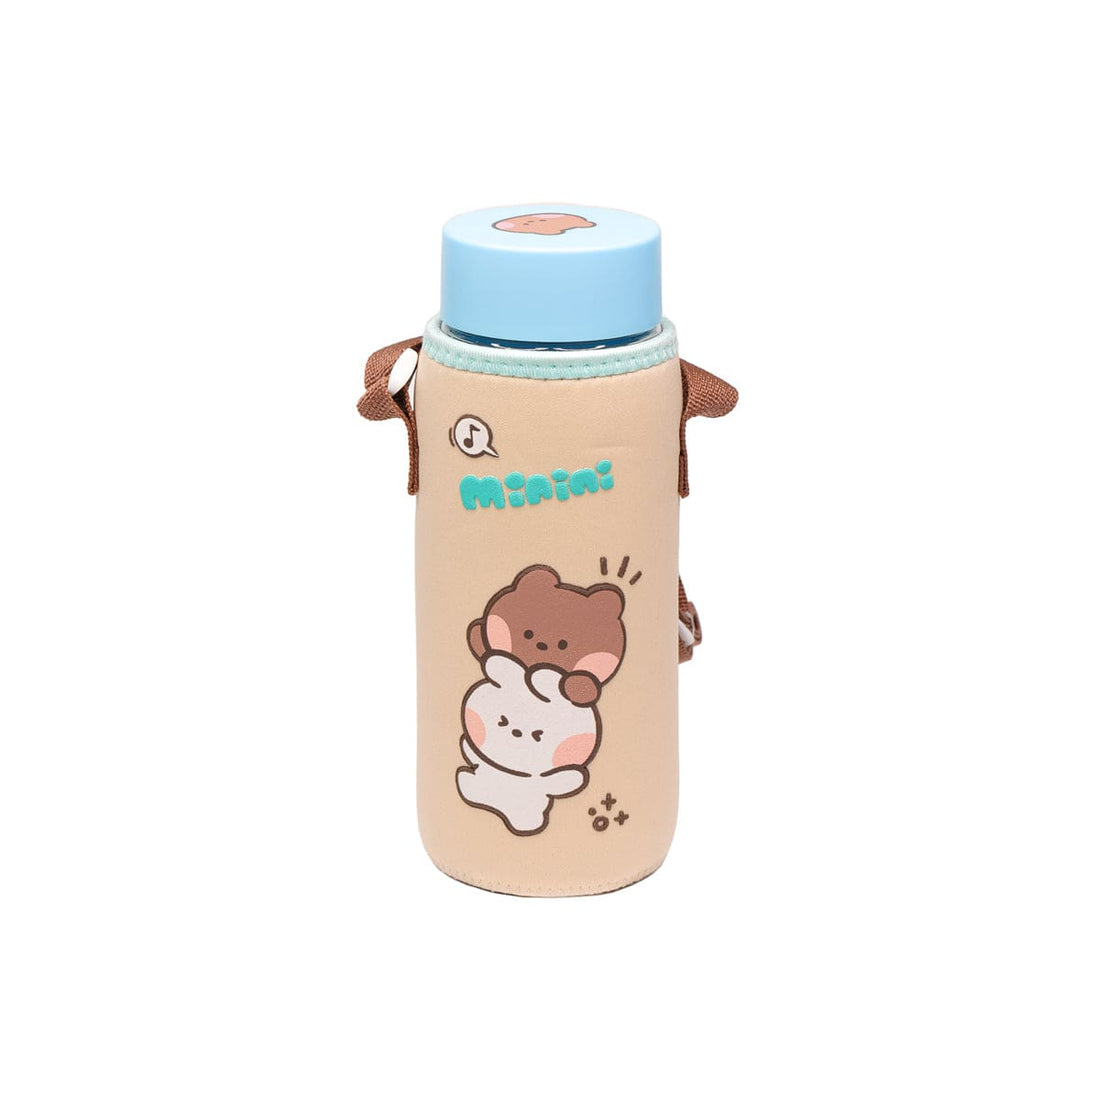 LINE FRIENDS LIVING WATER BOTTLE WITH SLEEVE LINE FRIENDS minini WATER BOTTLE WITH SLEEVE